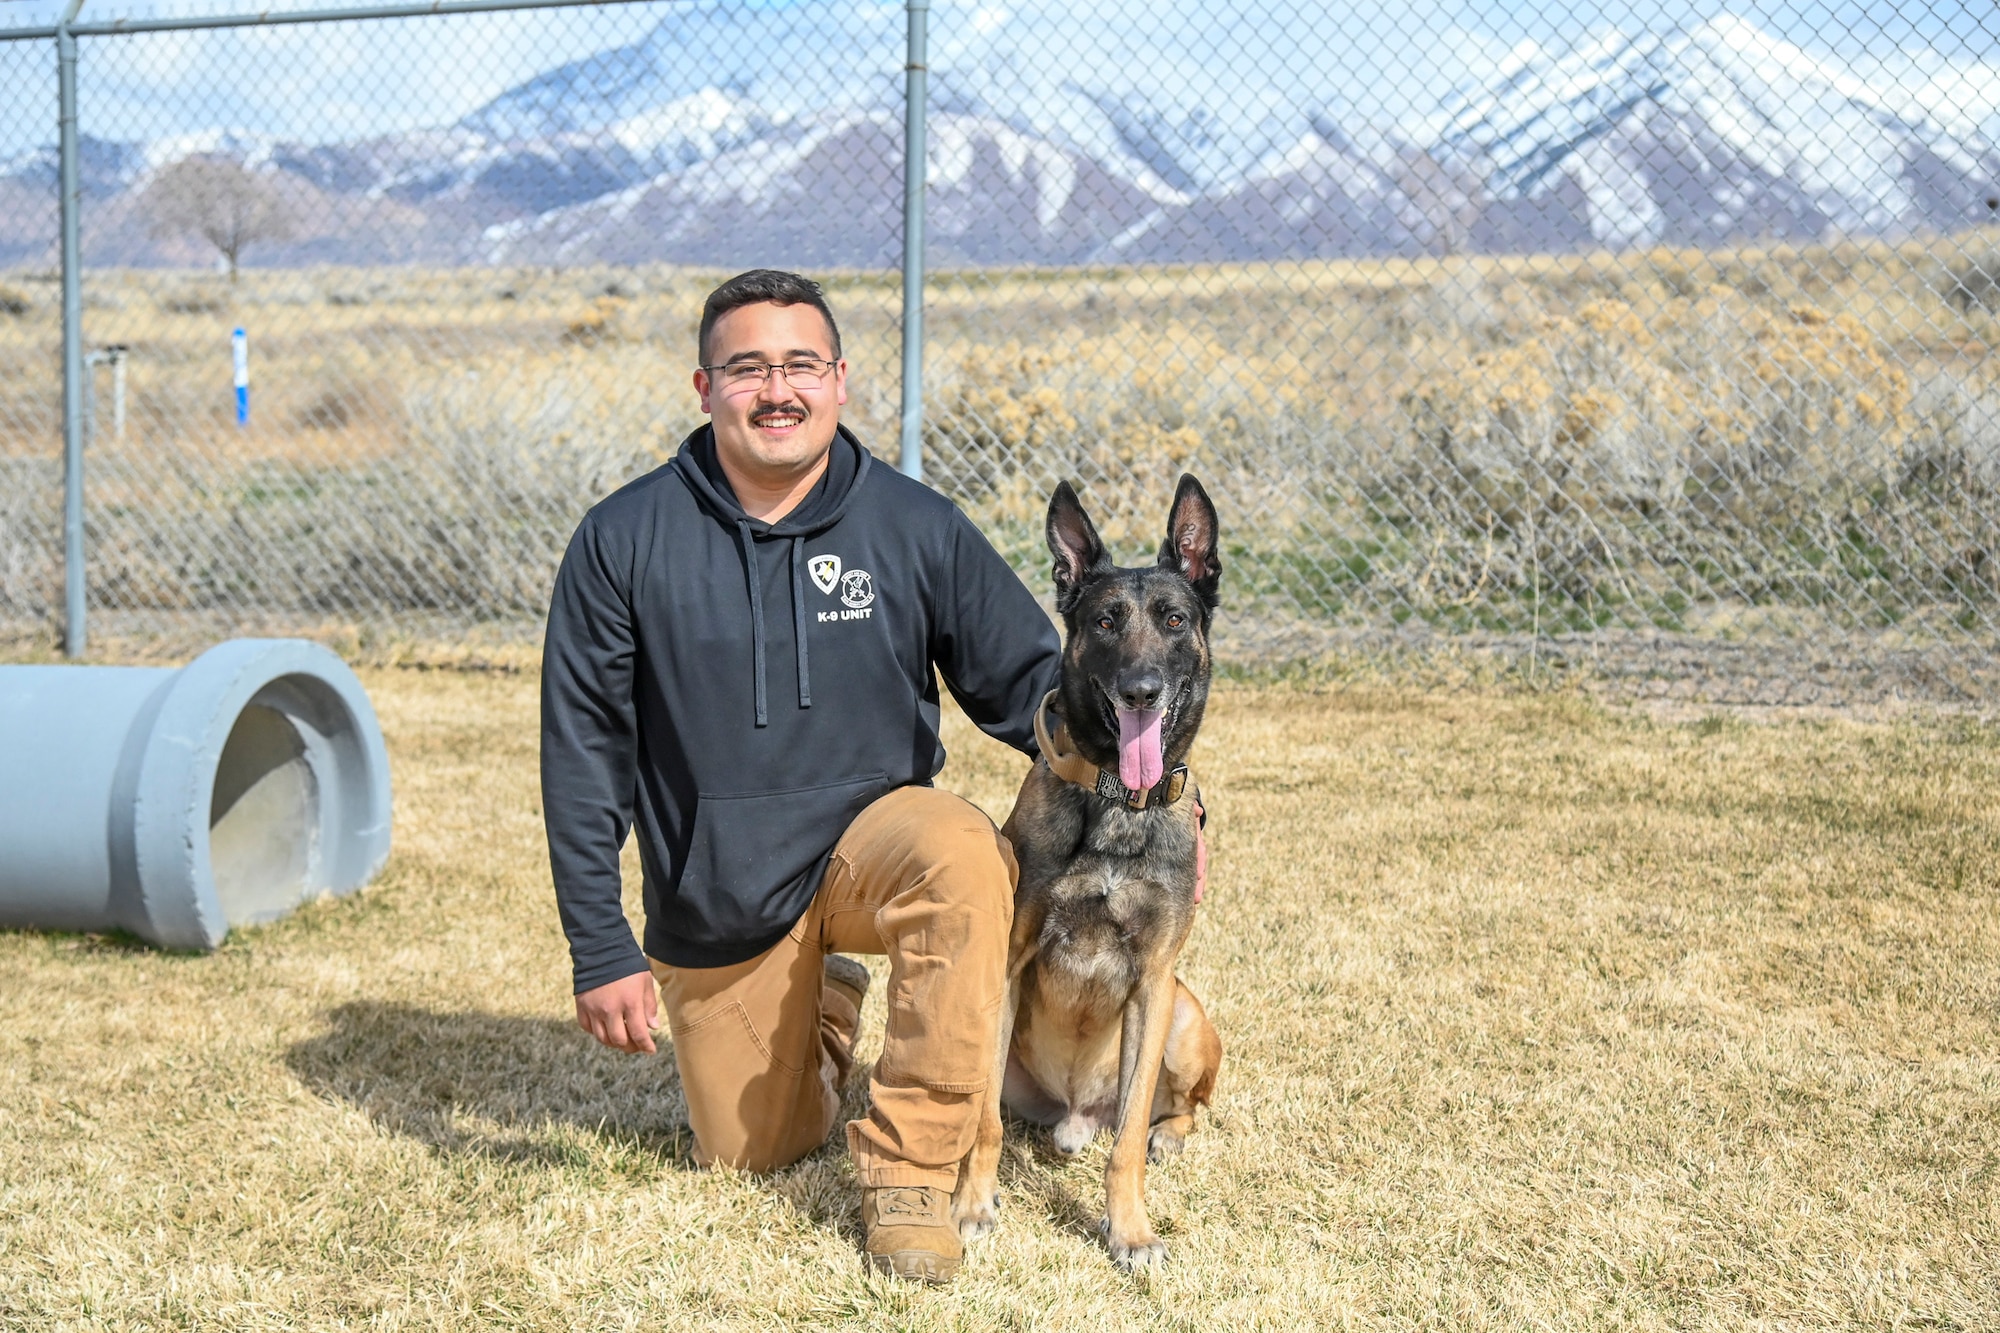 Posing for the camera, Staff Sgt. Reyes crouches on one knee next to retired military working dog Cvoky who is sitting.